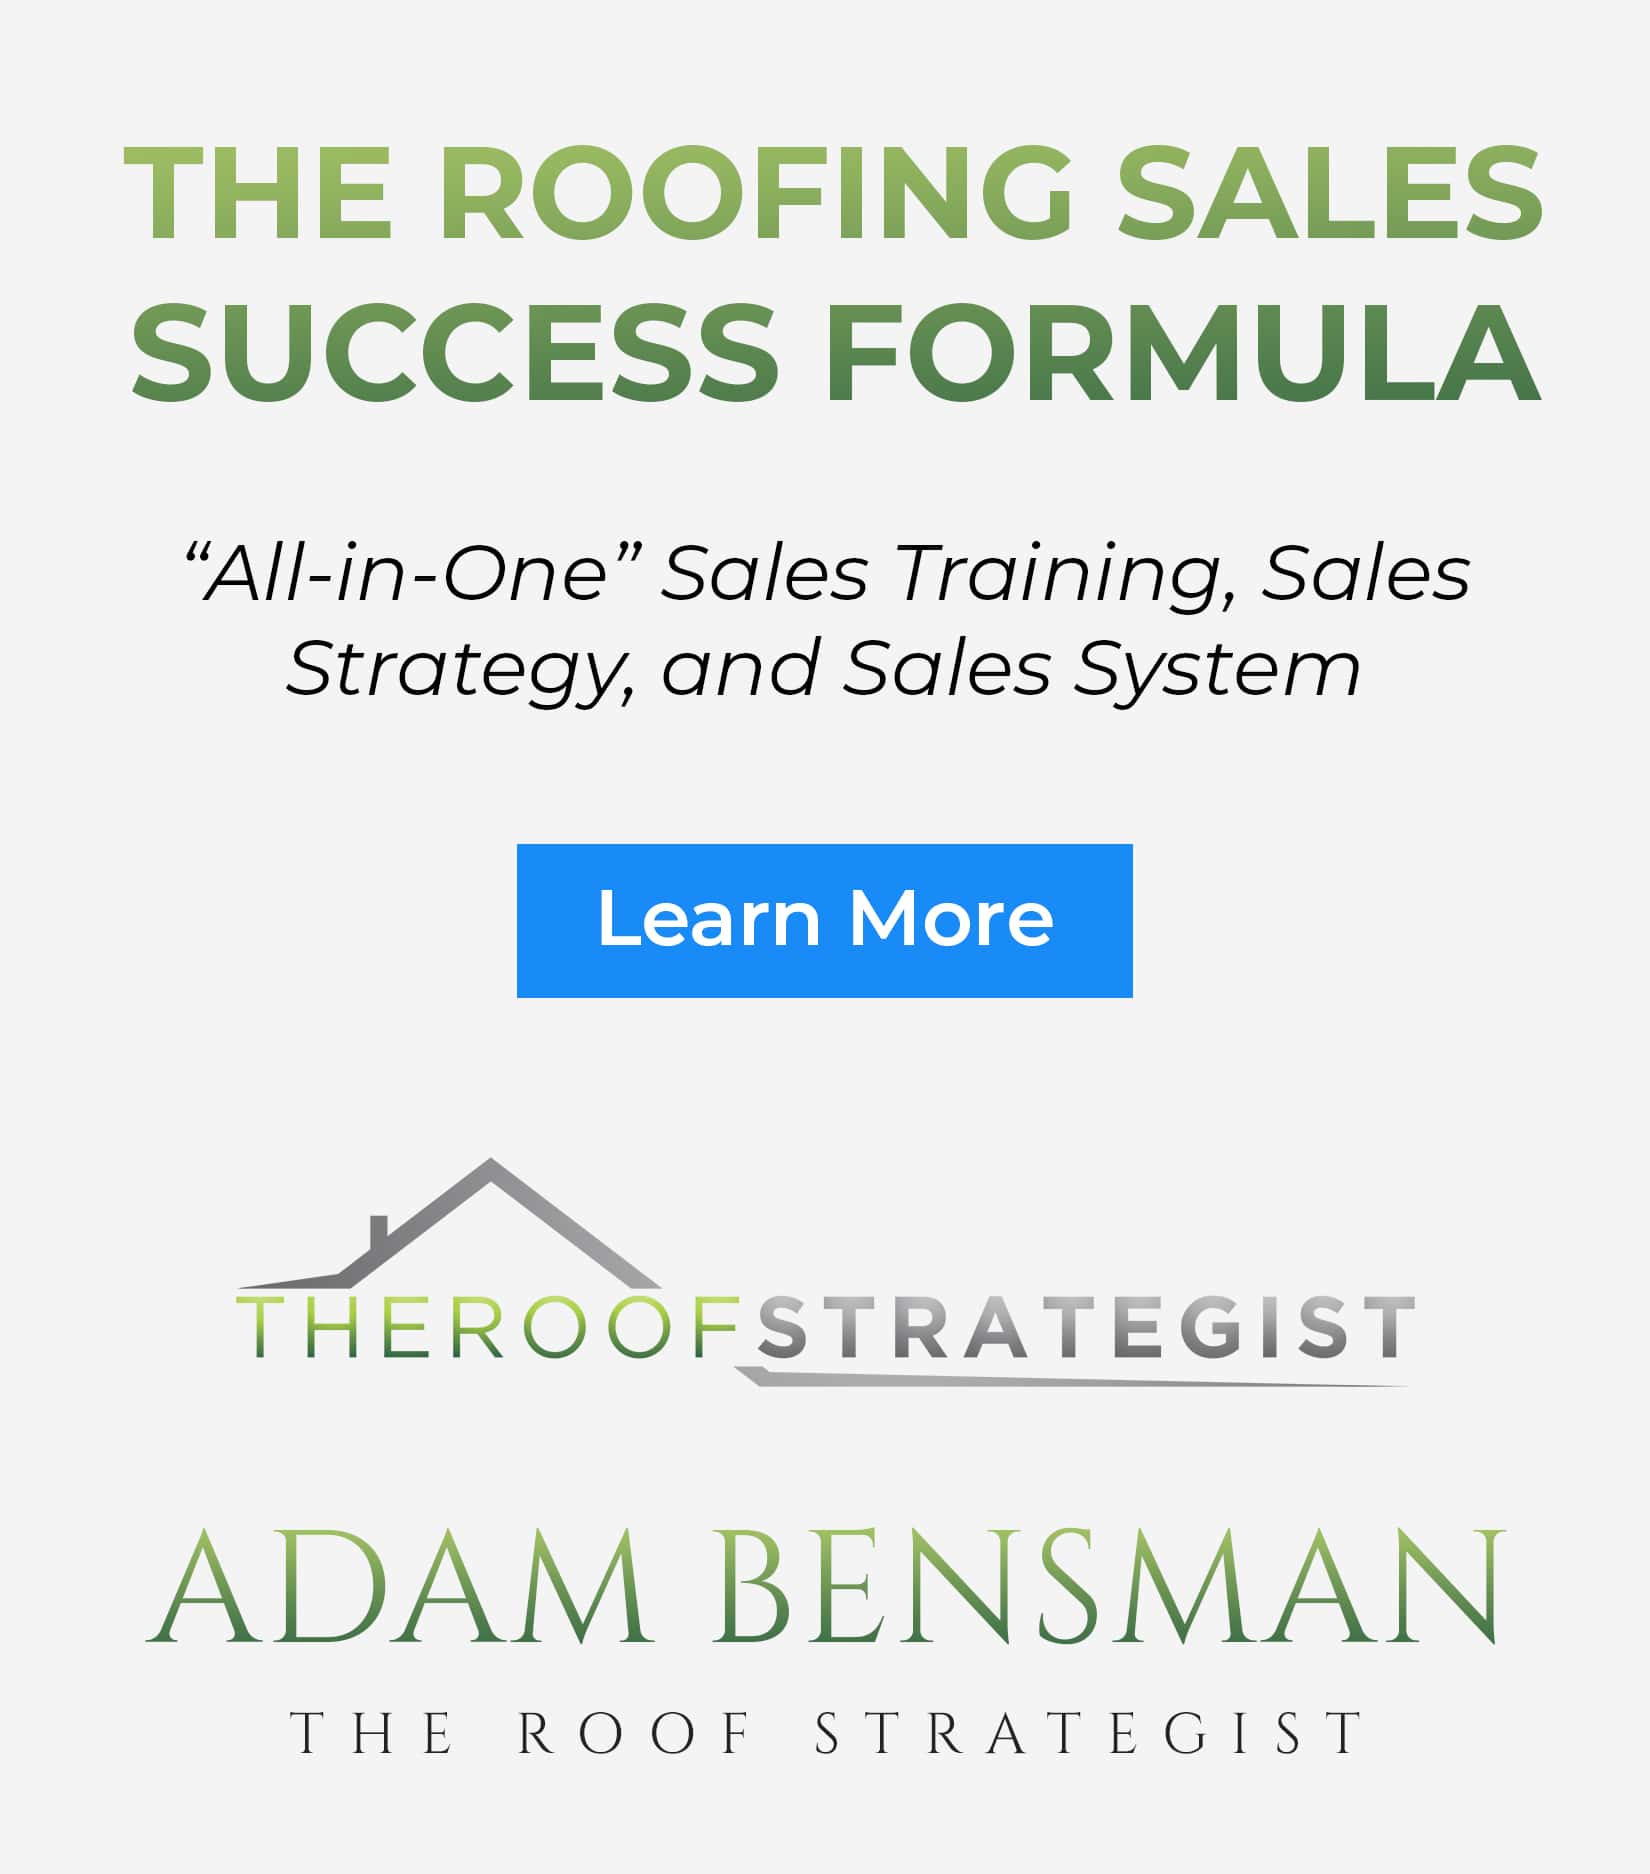 the Roofing Sales Success Formula.